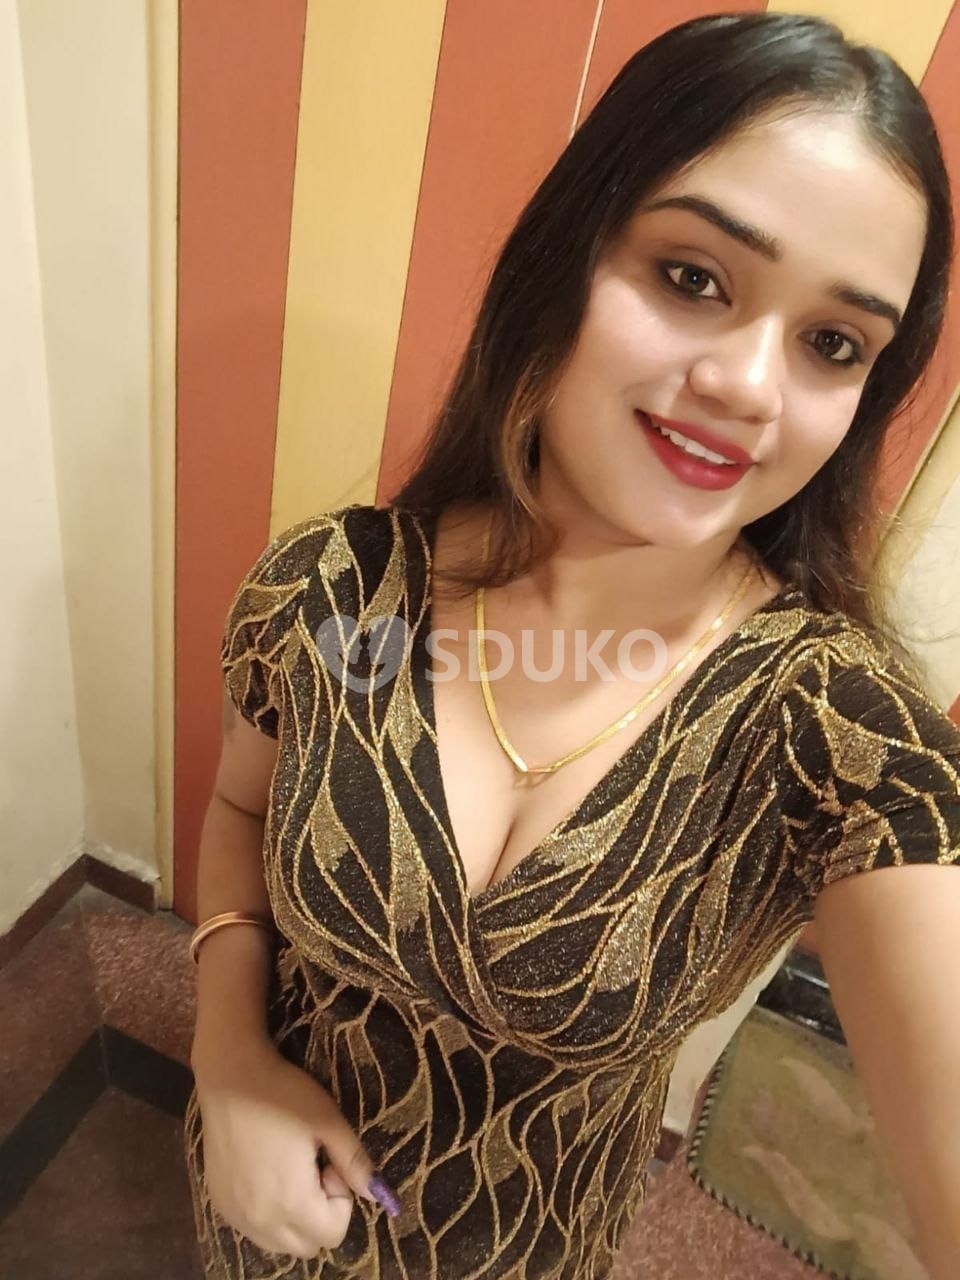 Anand Lok 💯Myself Payal call girl service hotel and home service 24 hours available now call me